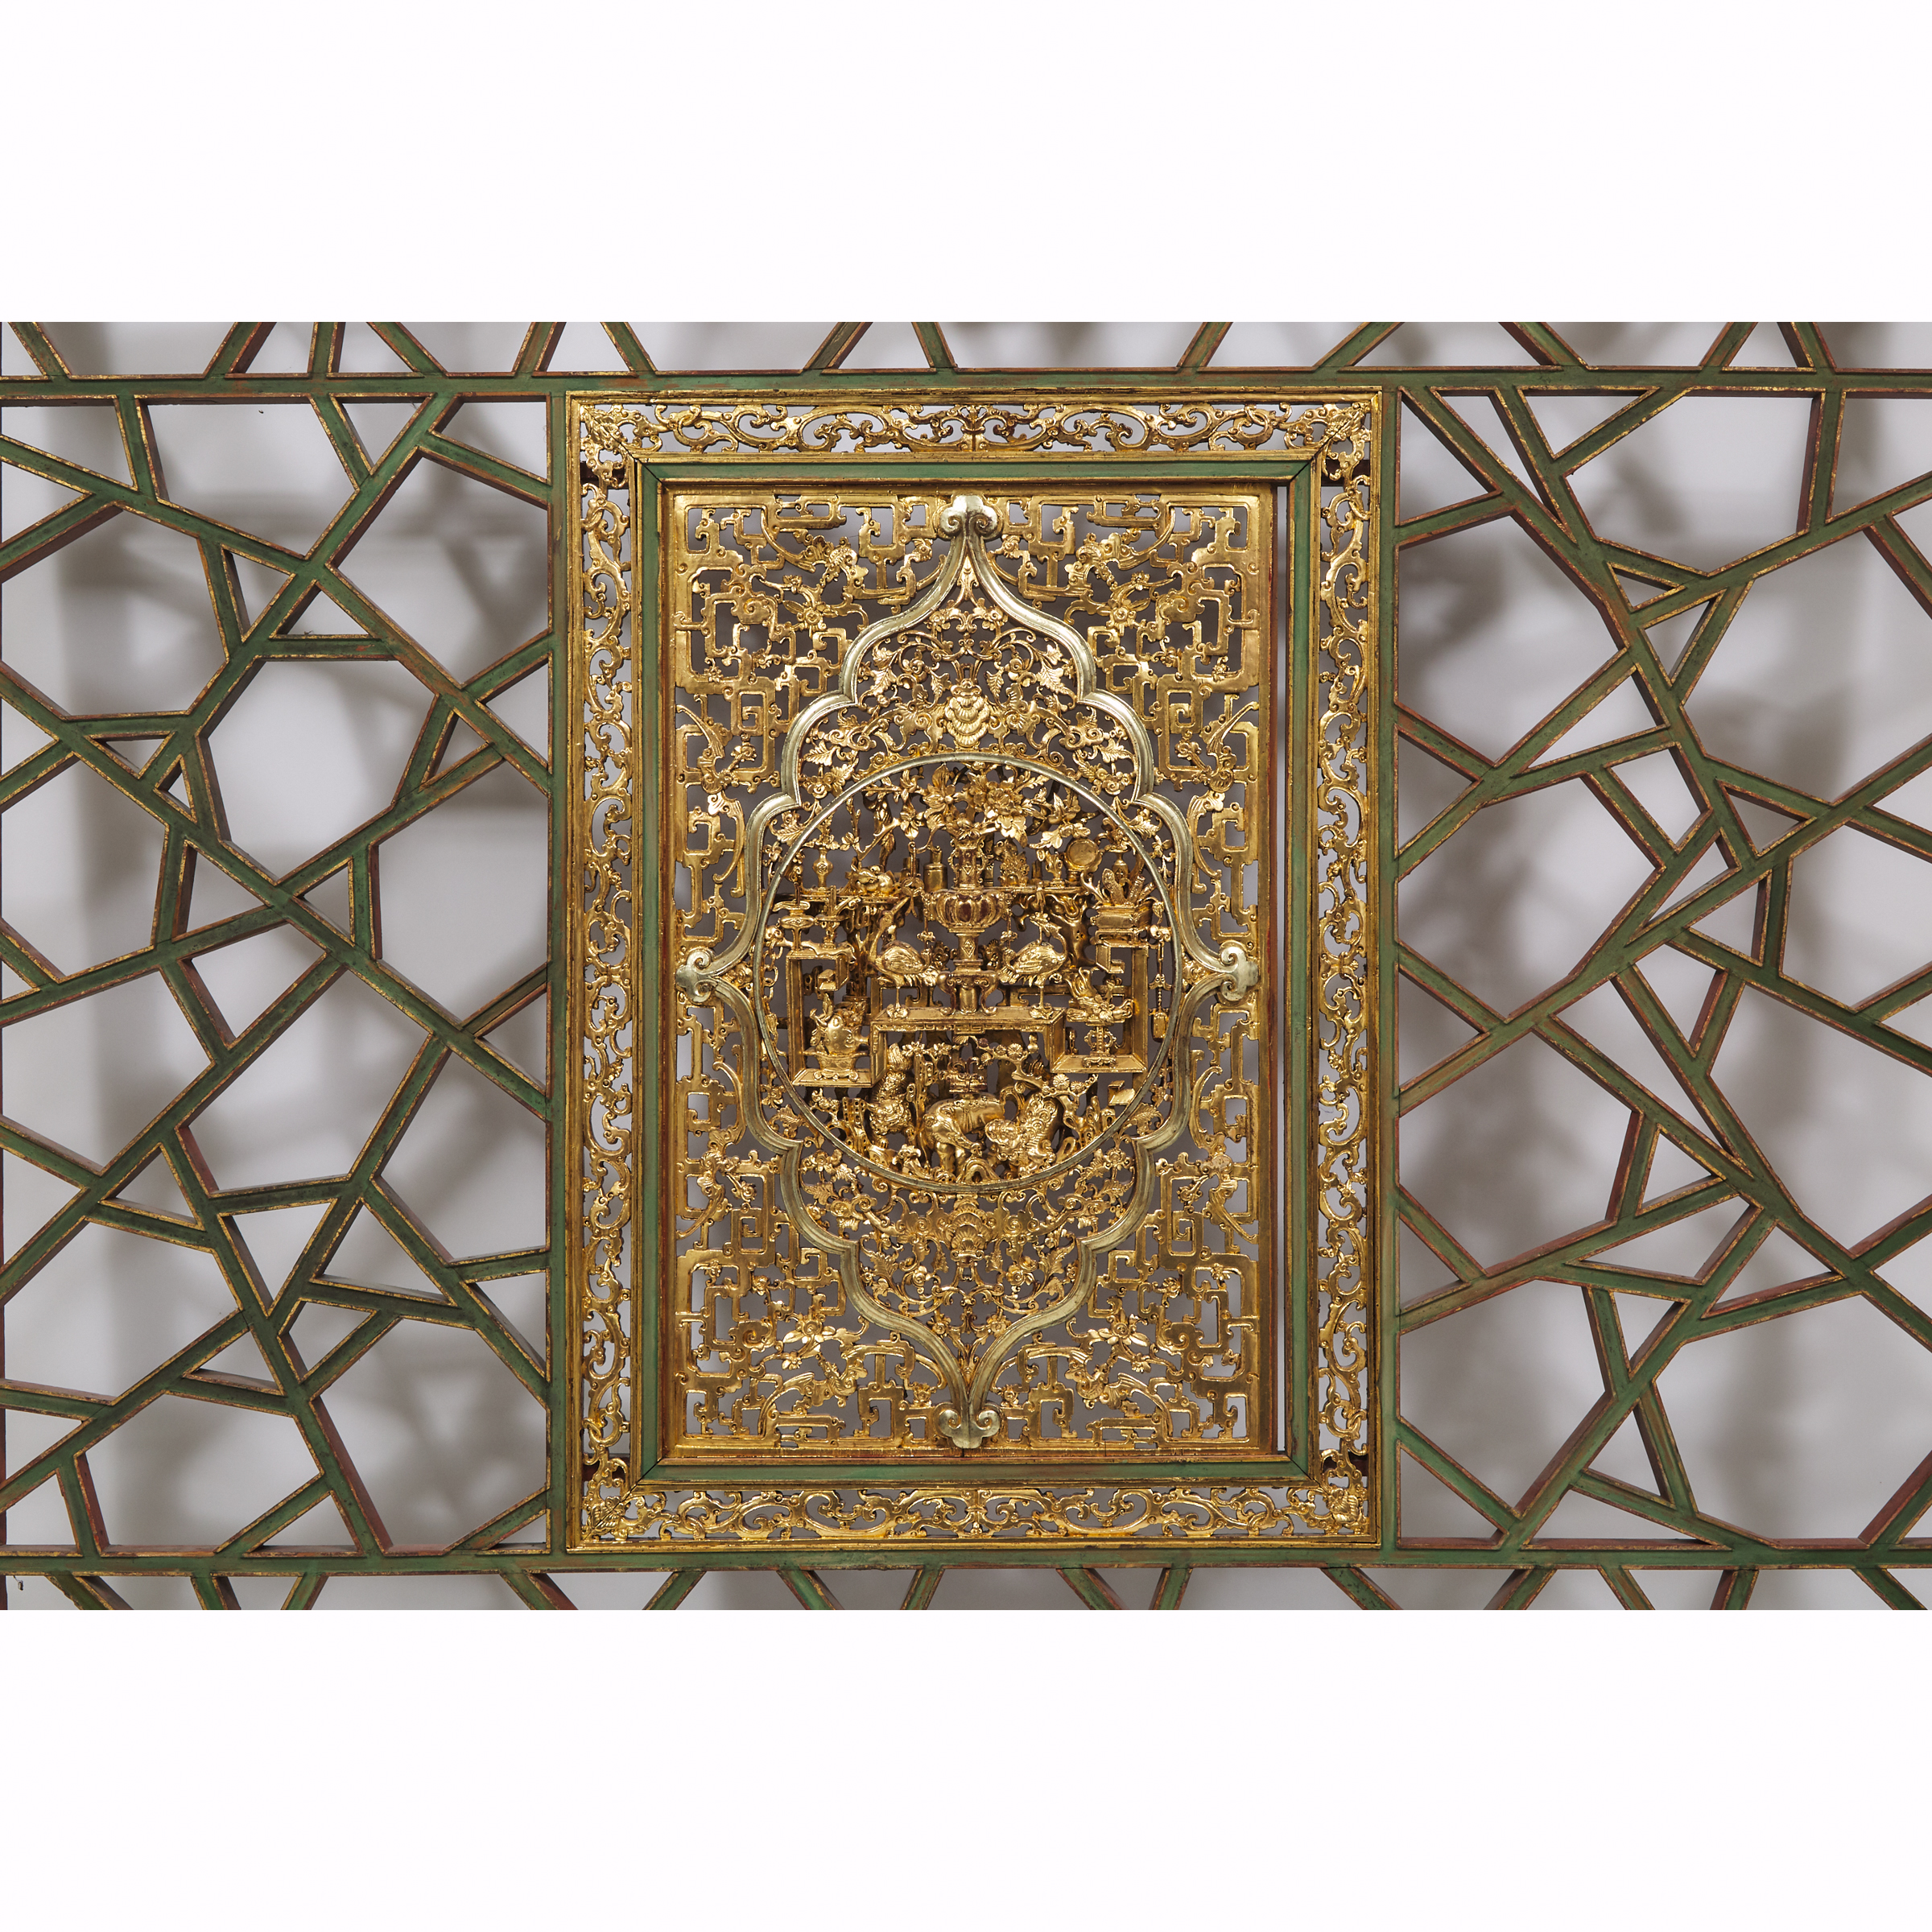 A Gilt and Polychrome Wood Carved Chinese Canopy Bed Roof Panel, 19th/Early 20th Century